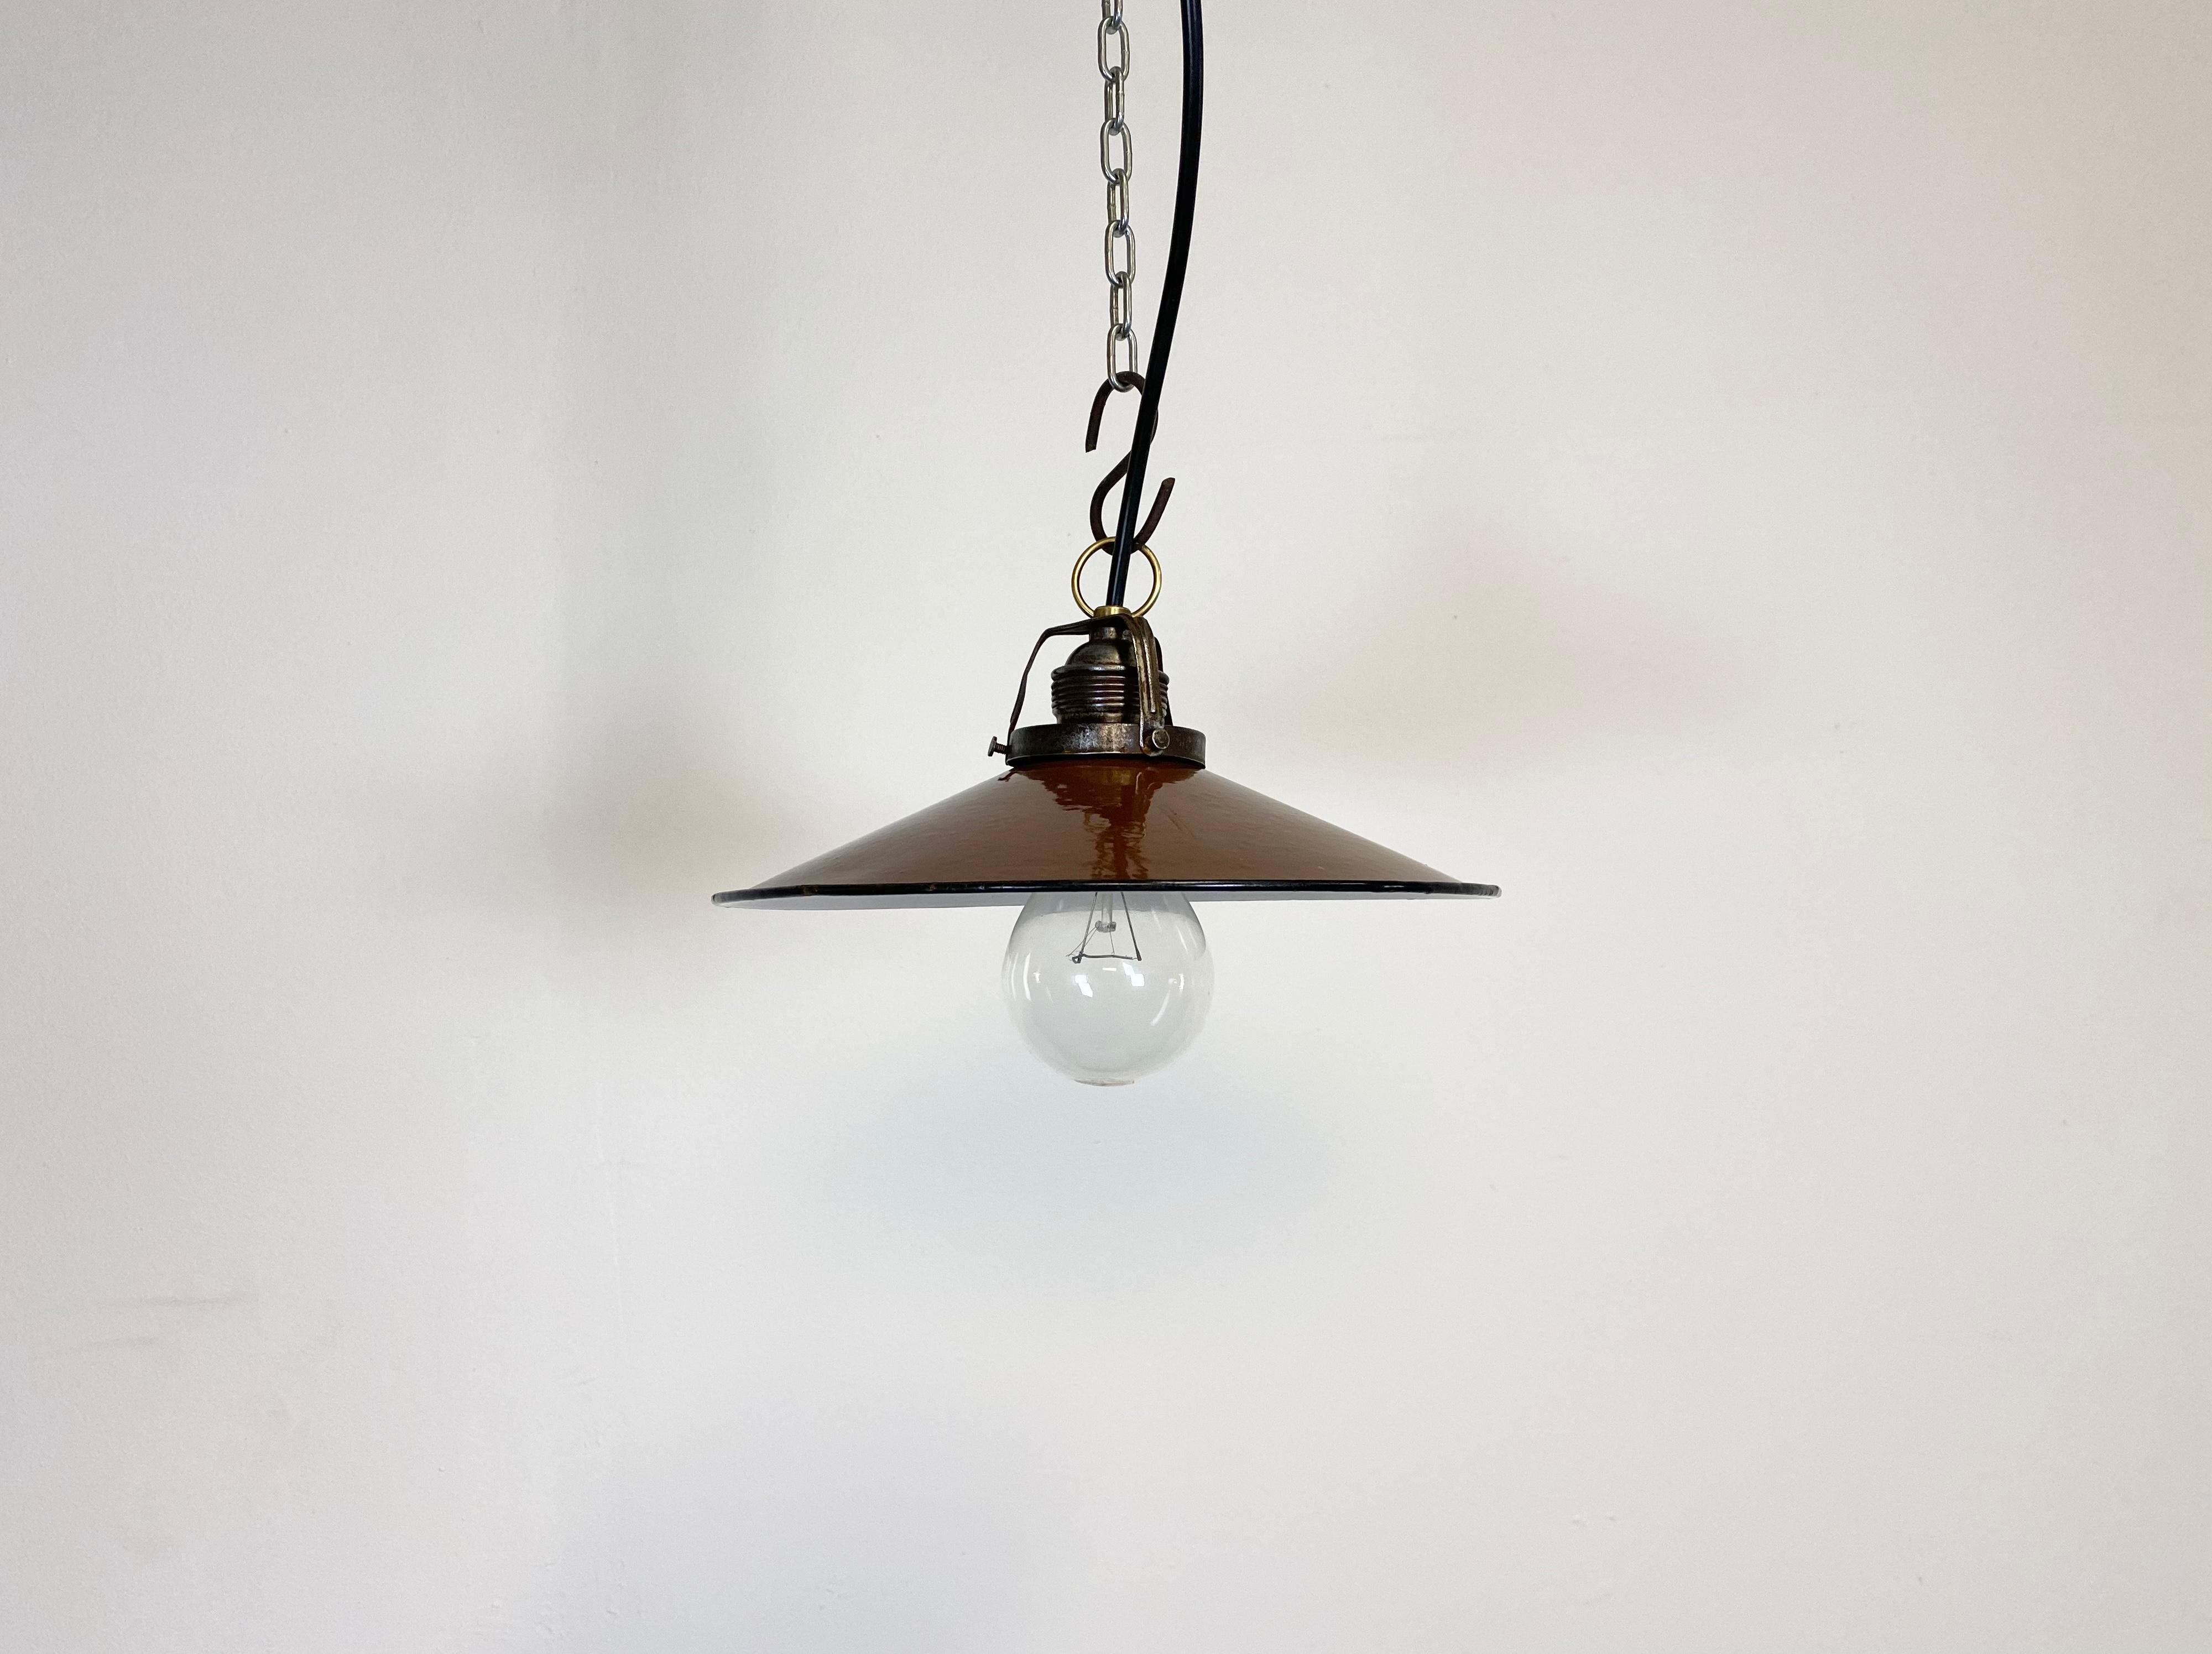 Vintage industrial enamel pendant lamp from the 1930s. It features brown enamel shade with white enamel interior and brass top. Original porcelain socket requires E 27 light bulbs. New wire.